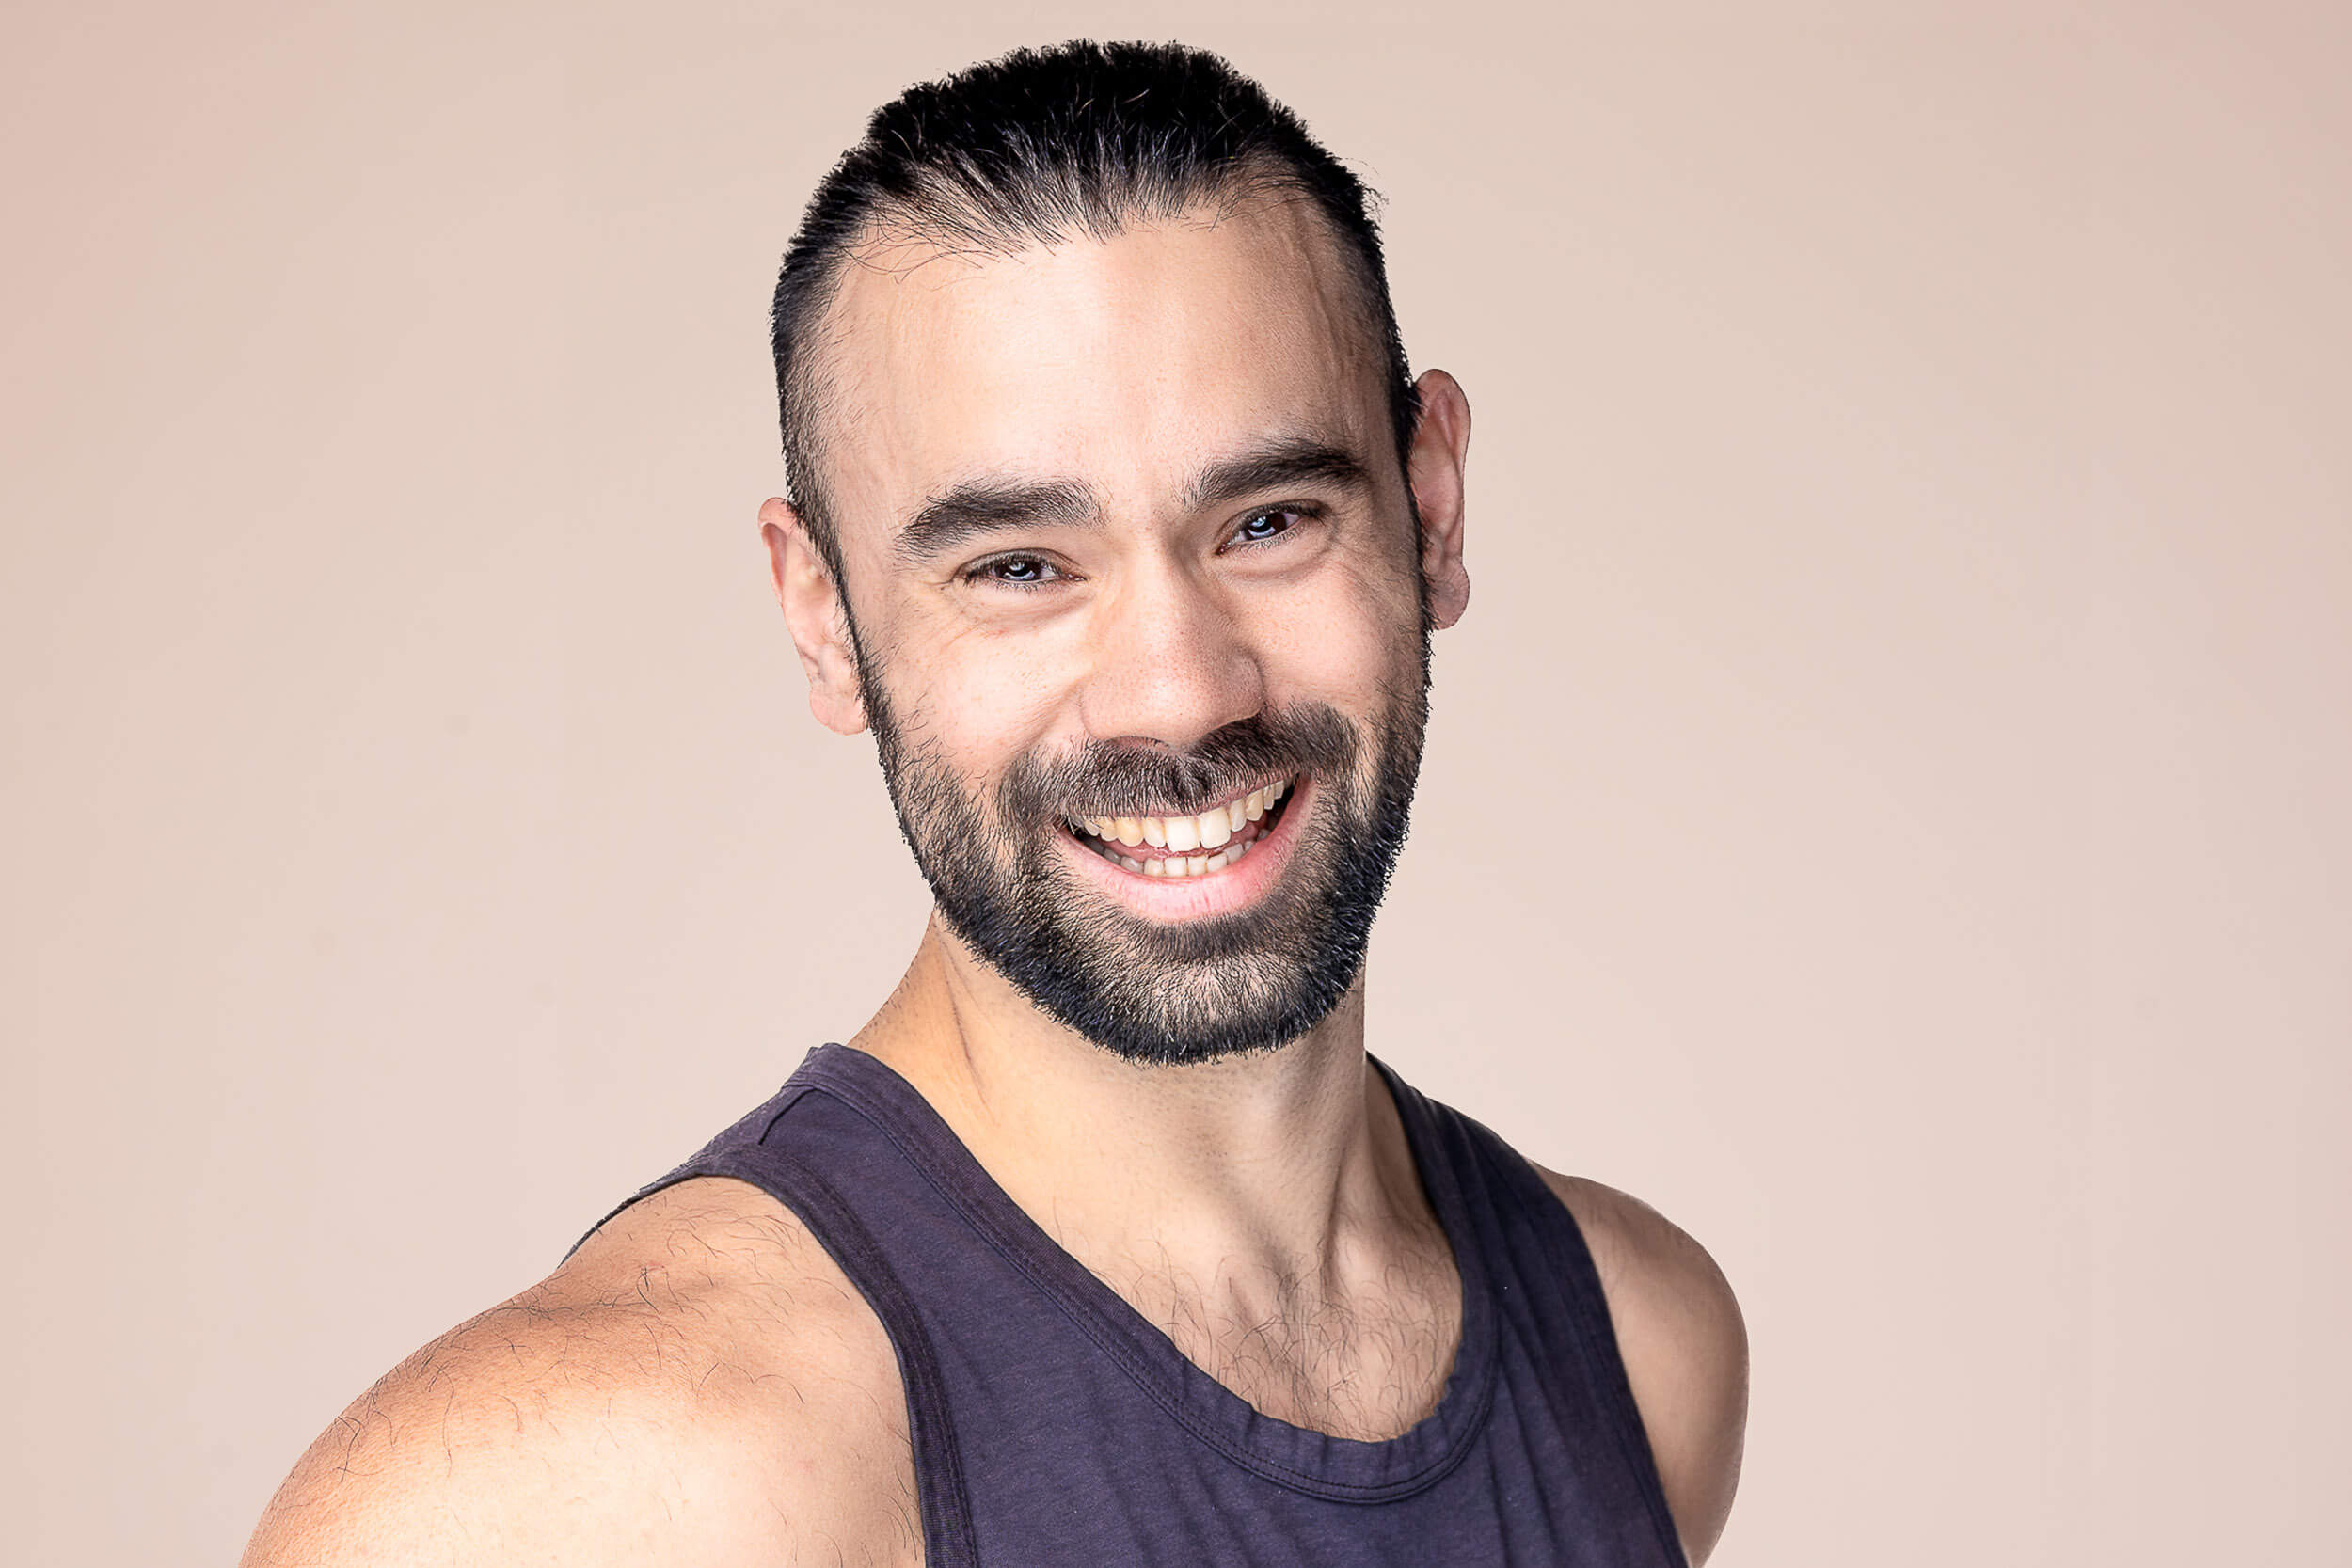 Energetic and friendly male yoga instructor with a beard, wearing a sleeveless dark tank top and a warm smile, epitomizing the inviting and positive energy at Shala Yoga studio in Squamish.